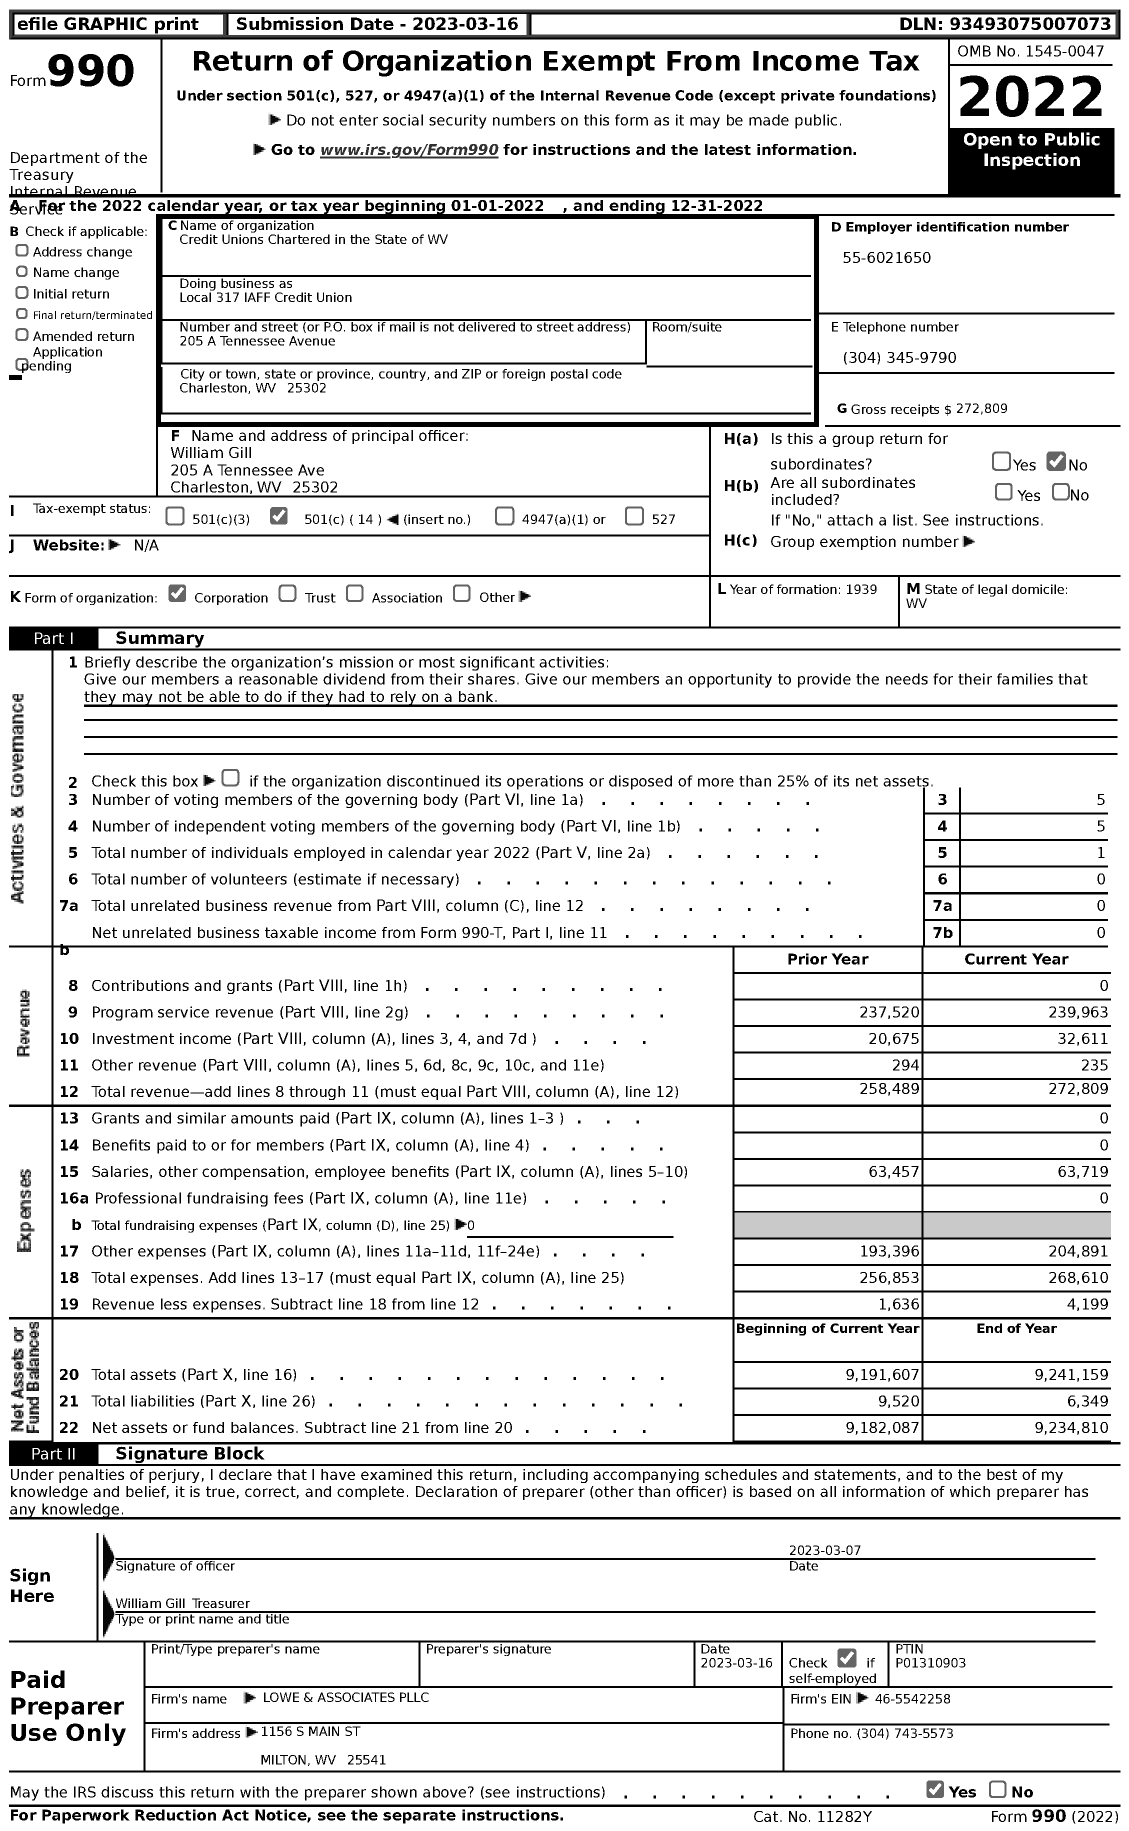 Image of first page of 2022 Form 990 for Credit Unions Chartered in the State of West Virginia Local 317 I - Local 317 I Aff